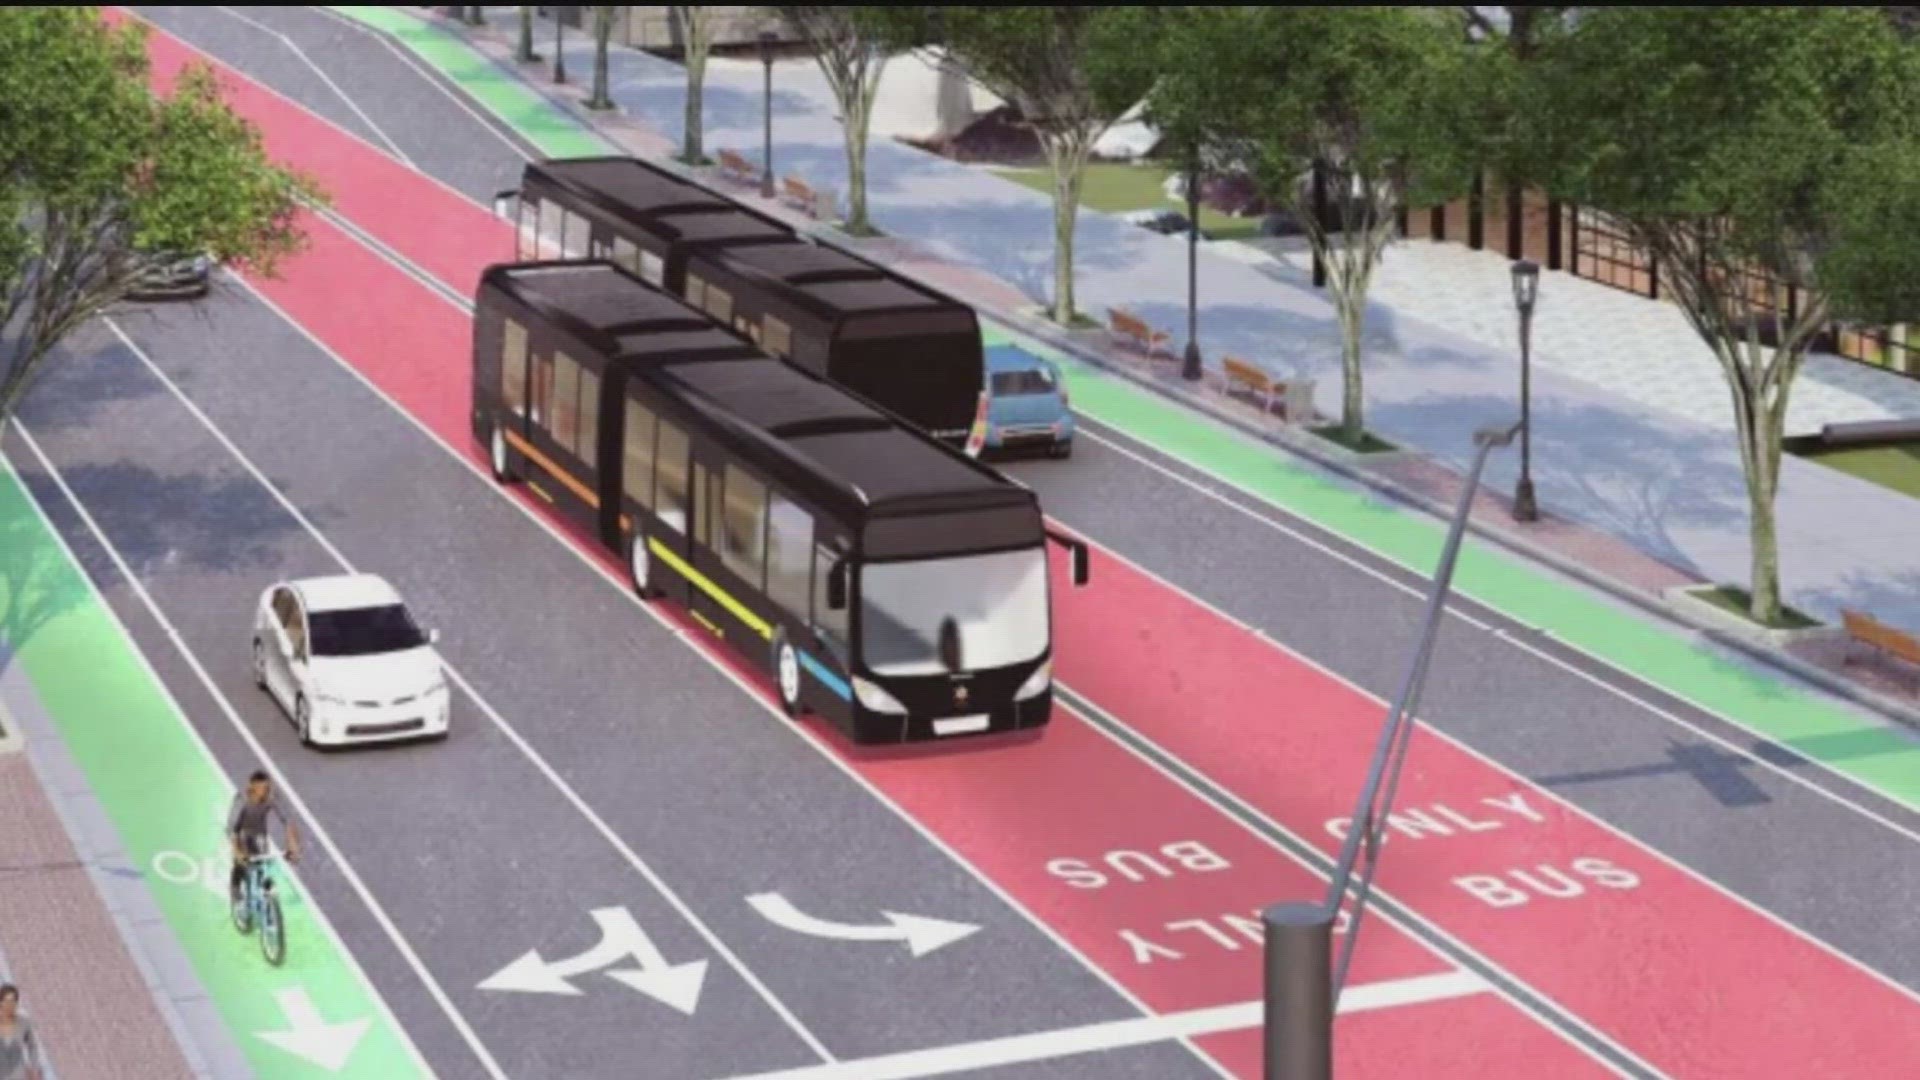 Commuters in Clayton County will get a chance to sound off about plans for the first bus rapid transit route in their area.